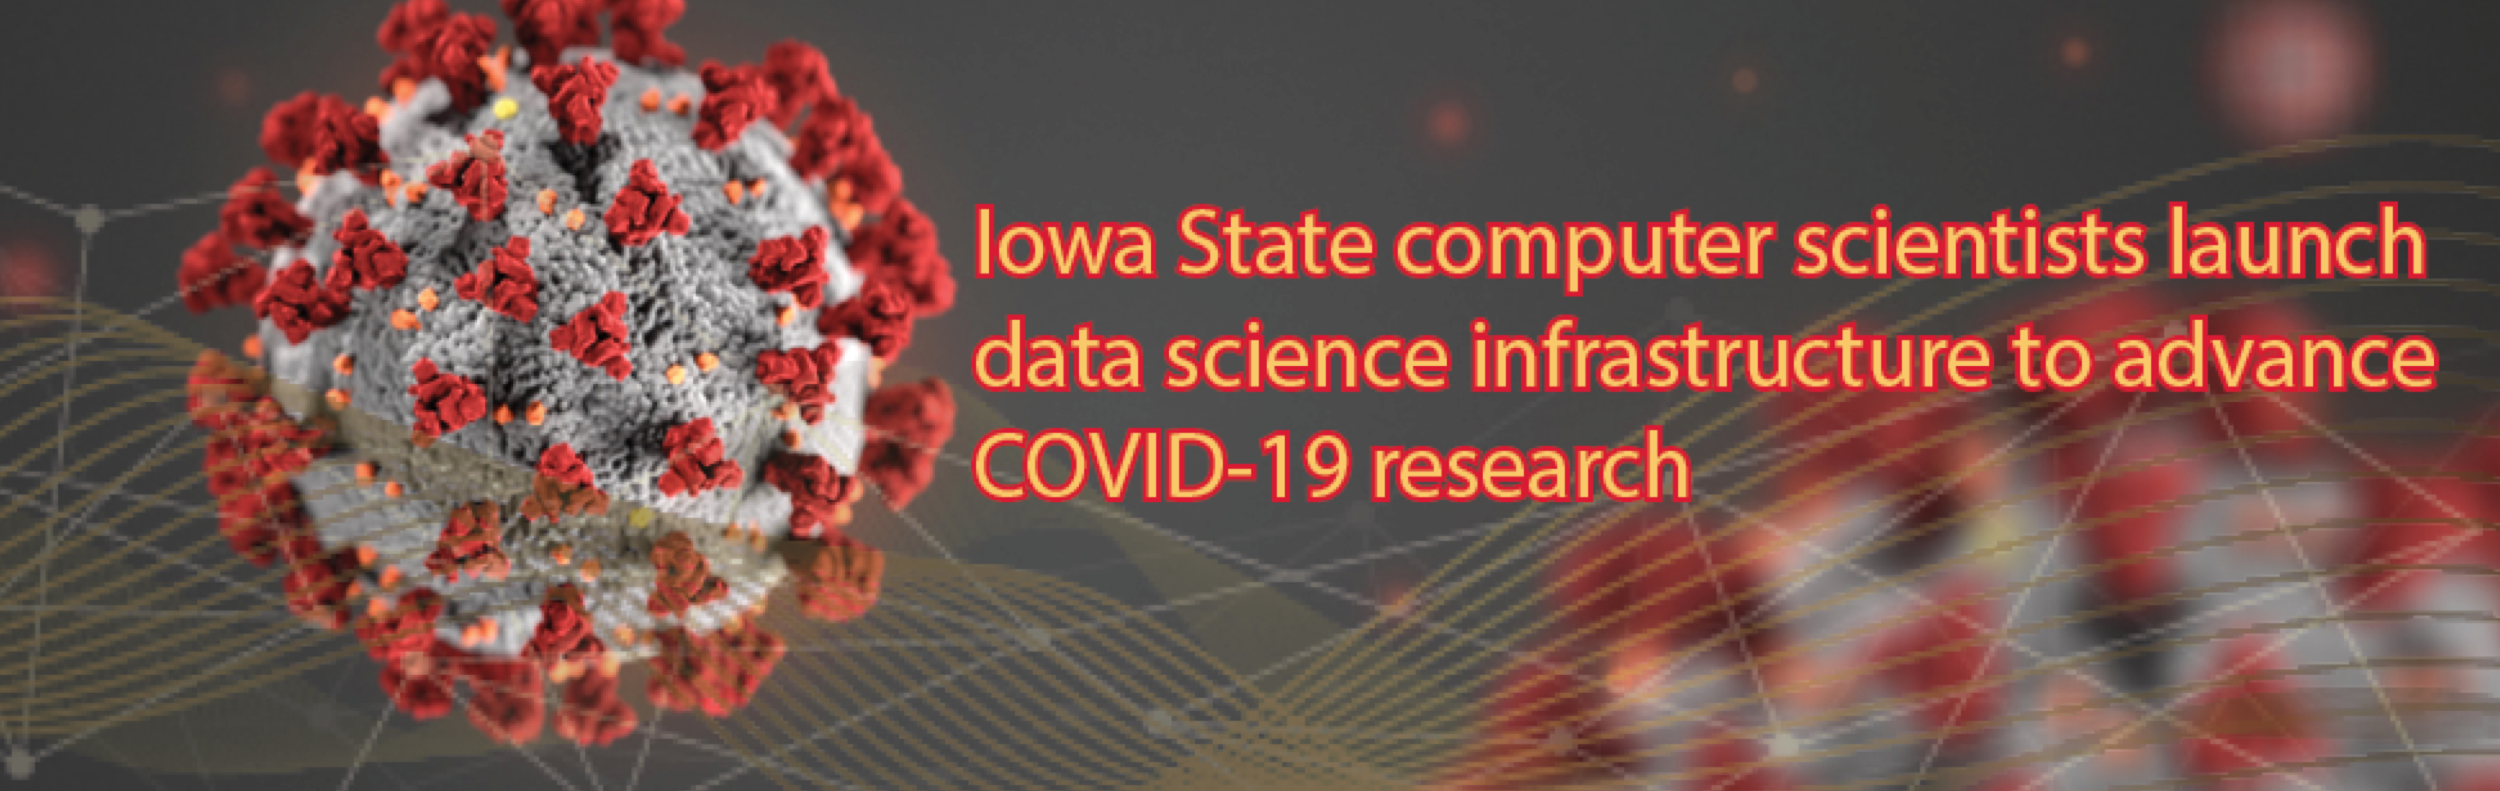 launch data science infrastructure to advance COVID-19 research